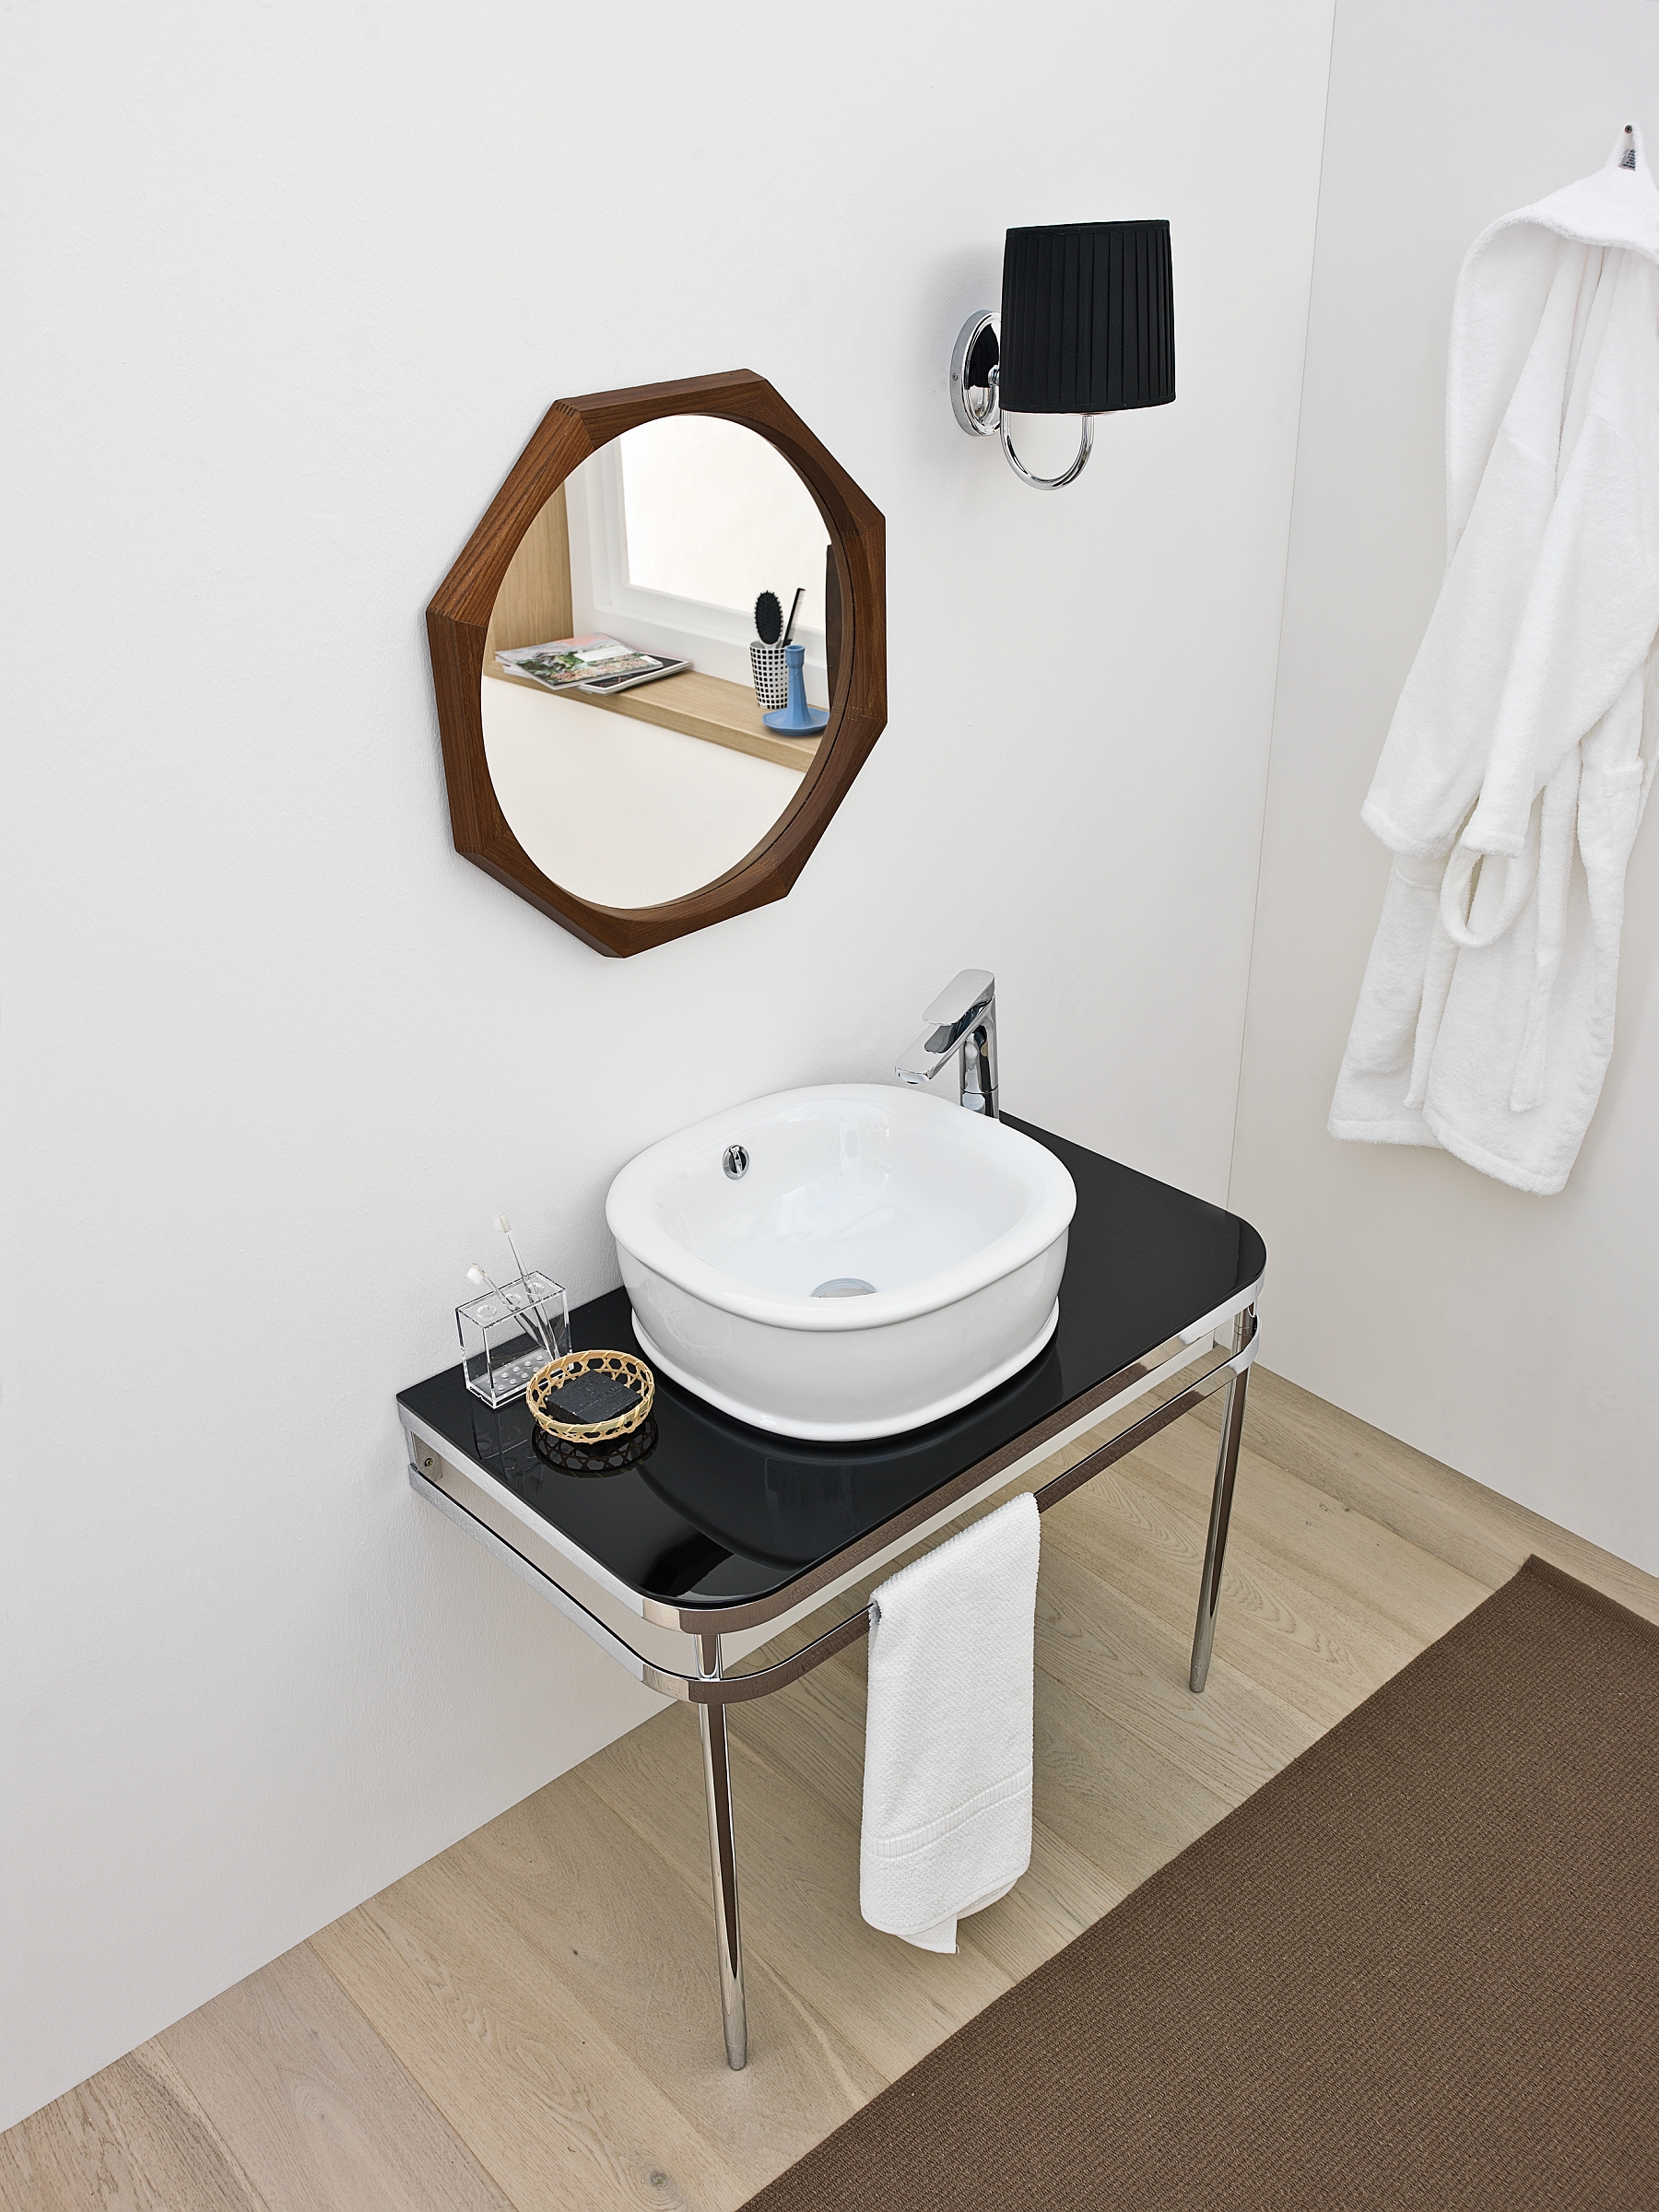 Lovely Azuley sink adds black hue to the trendy, white bathroom